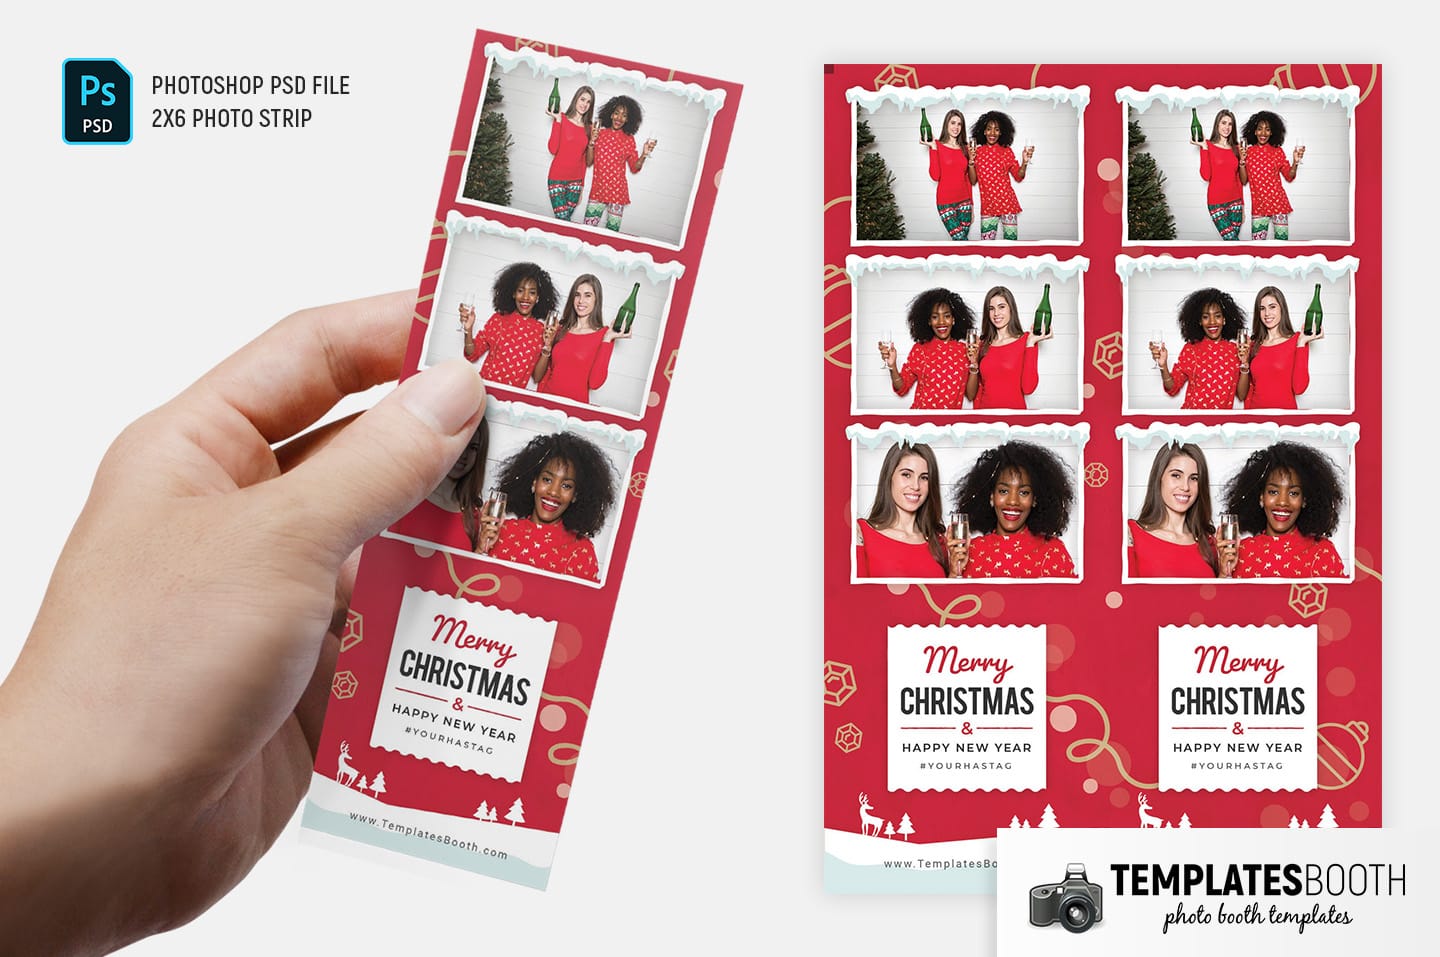 Merry Christmas Photo Booth Template (2x6 photo strip)